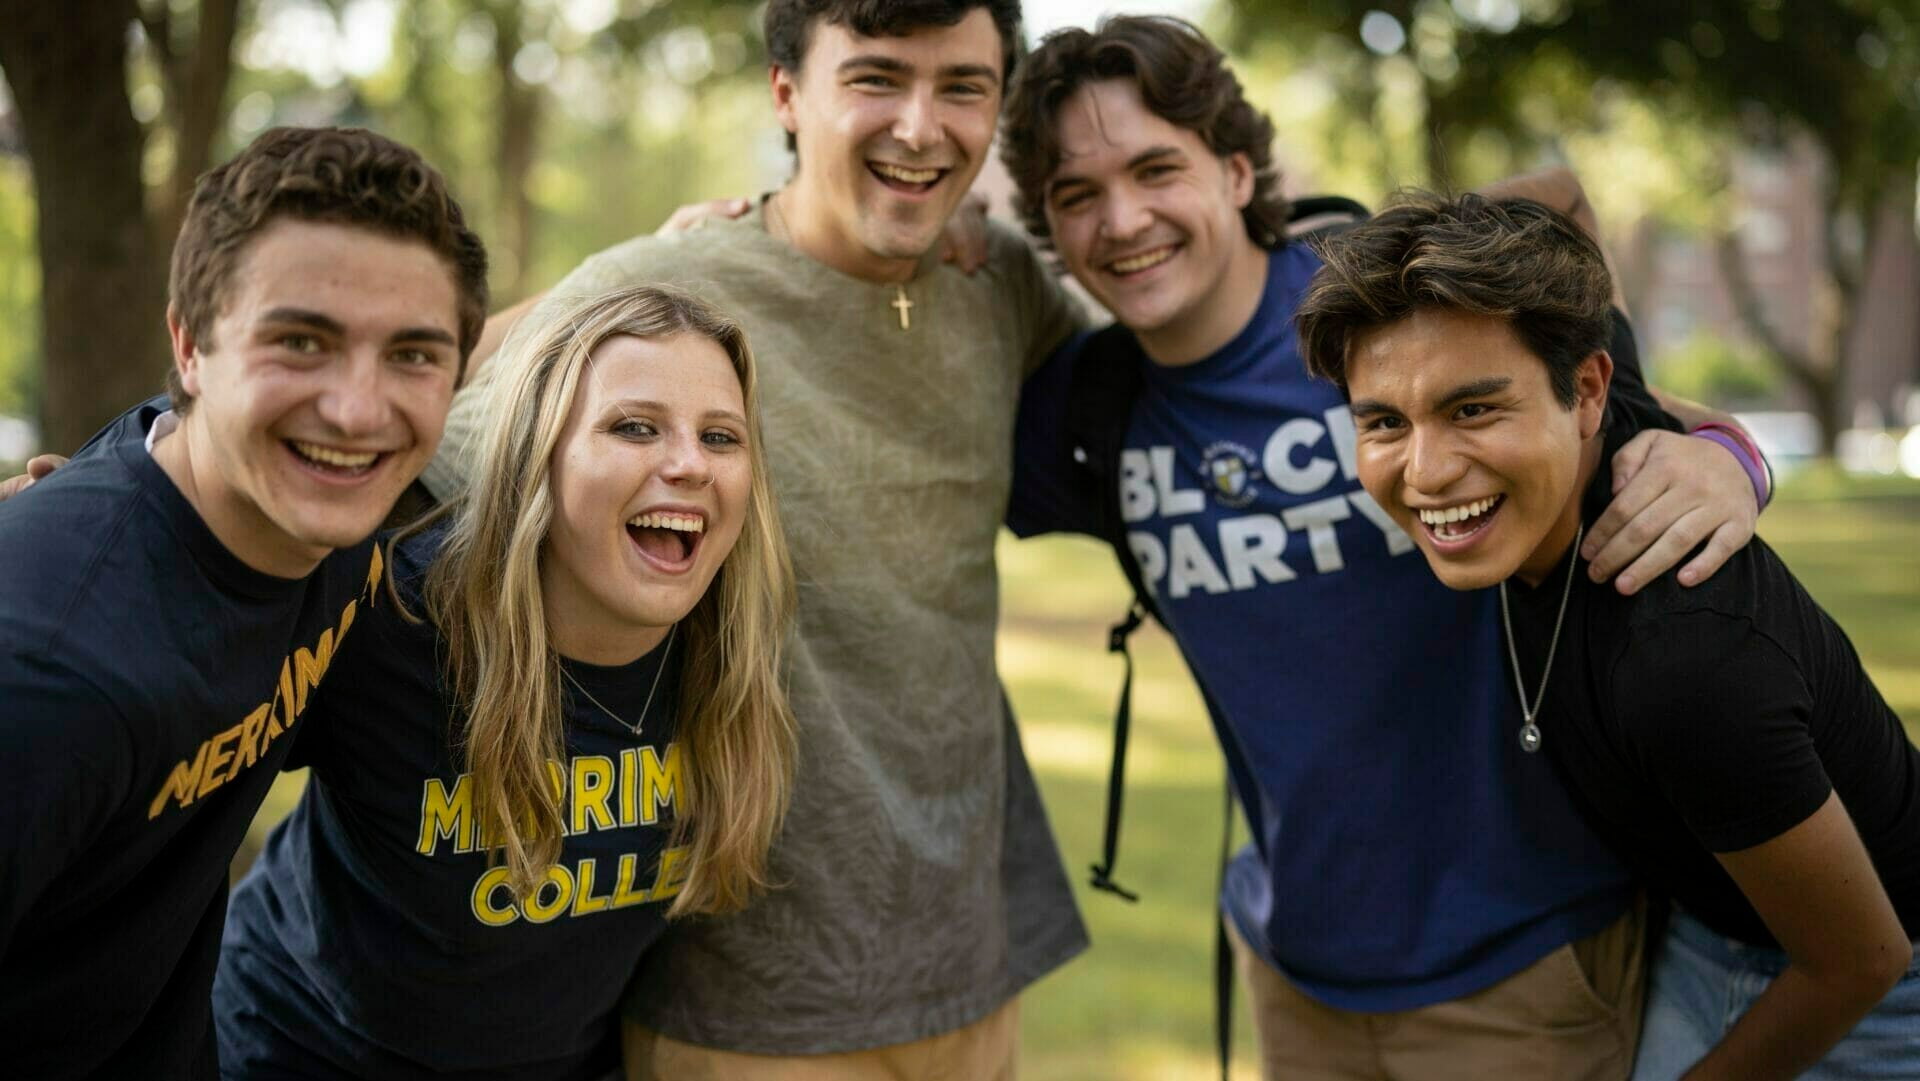 Photography for Merrimack College brochure covers.